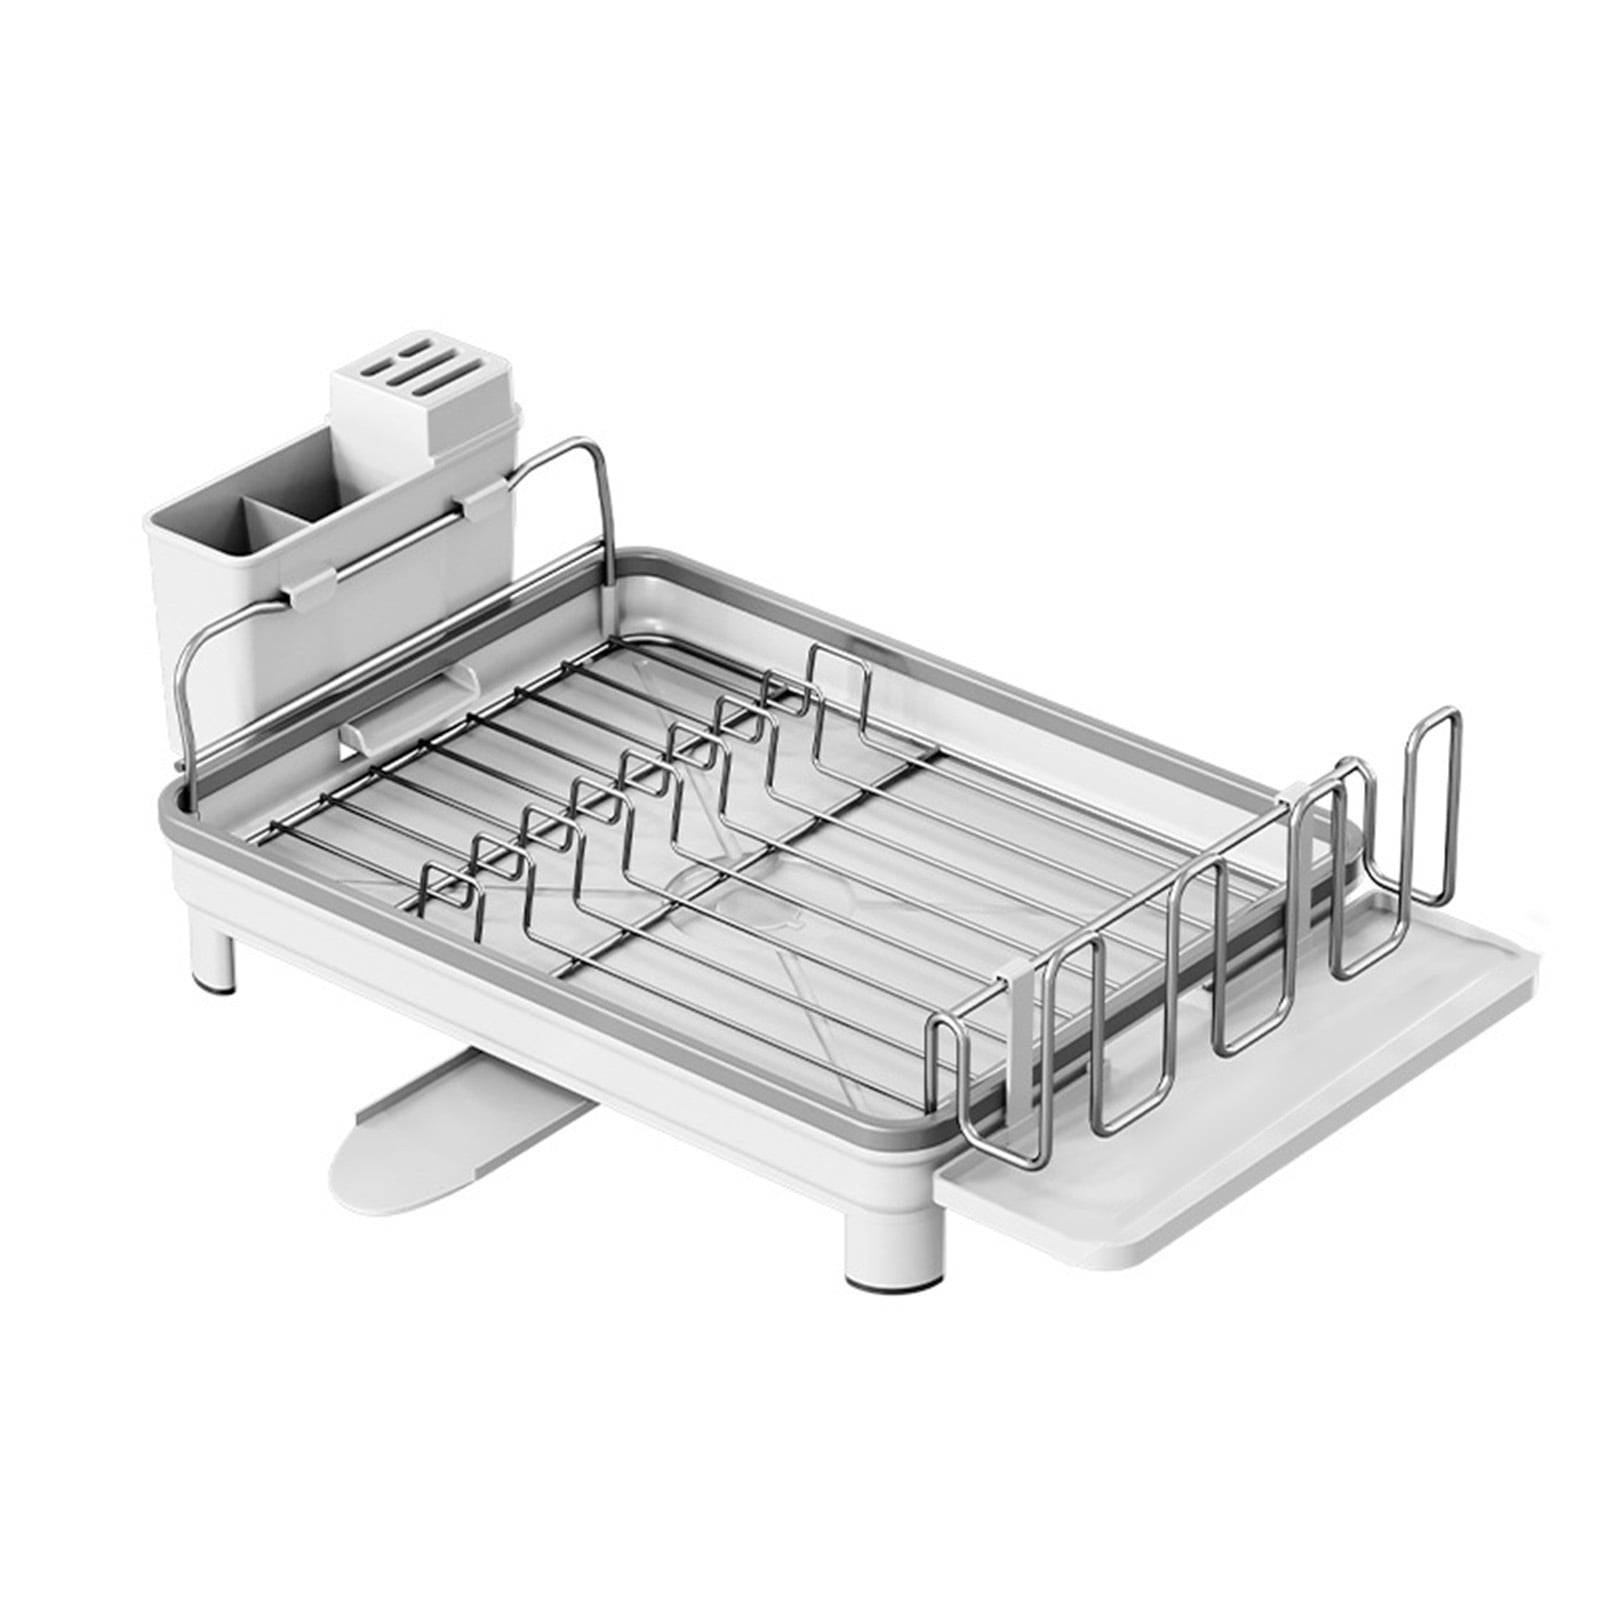 Easy Assemble Dish Drainer Large Capacity Stainless Steel Dish